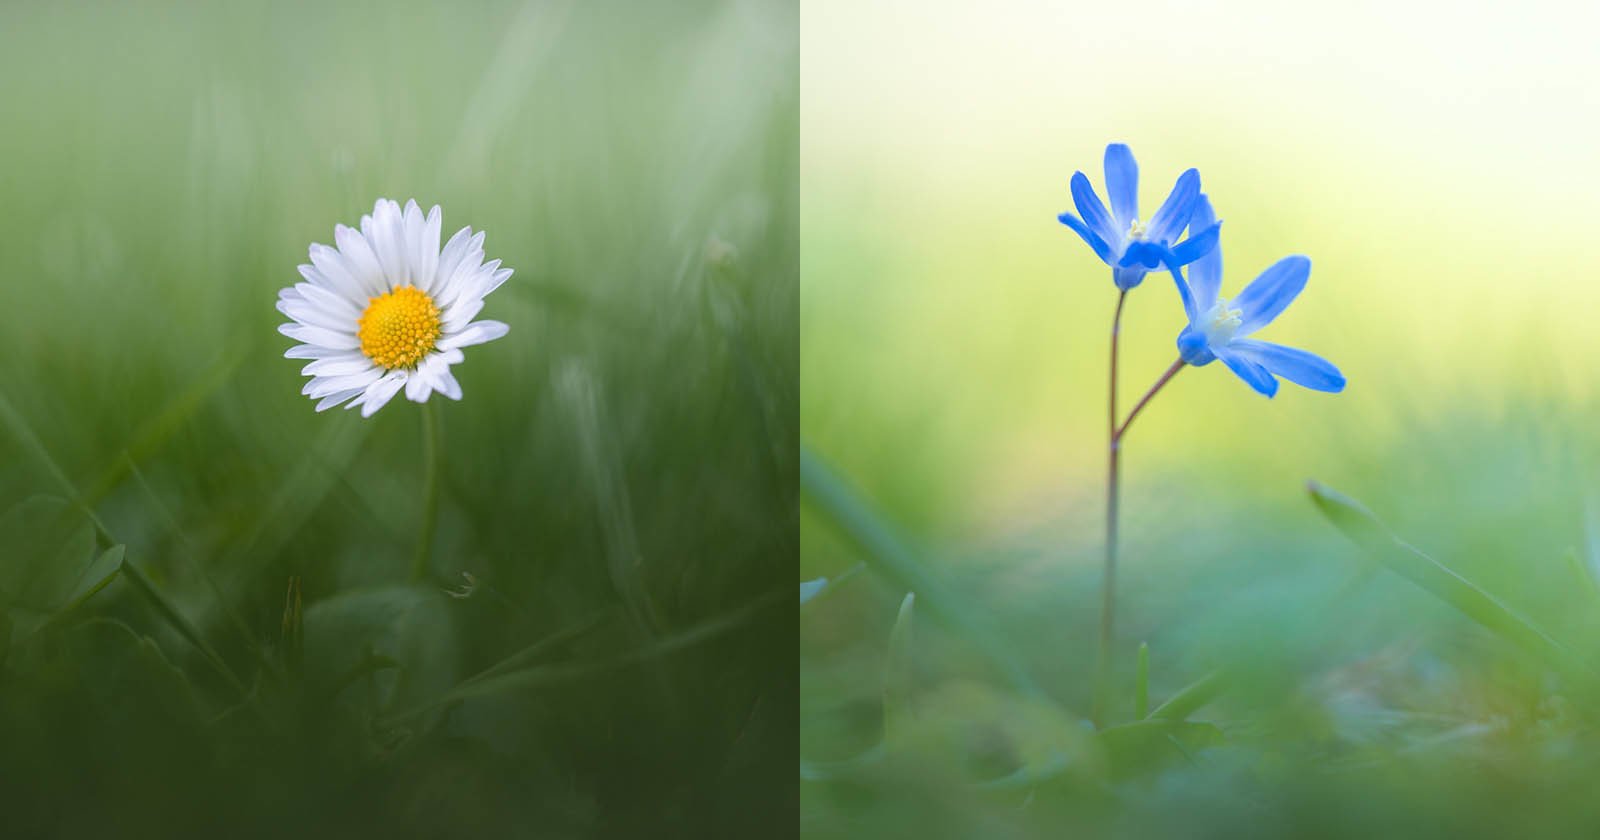 13 Tips for Photographing Tiny Spring Flowers